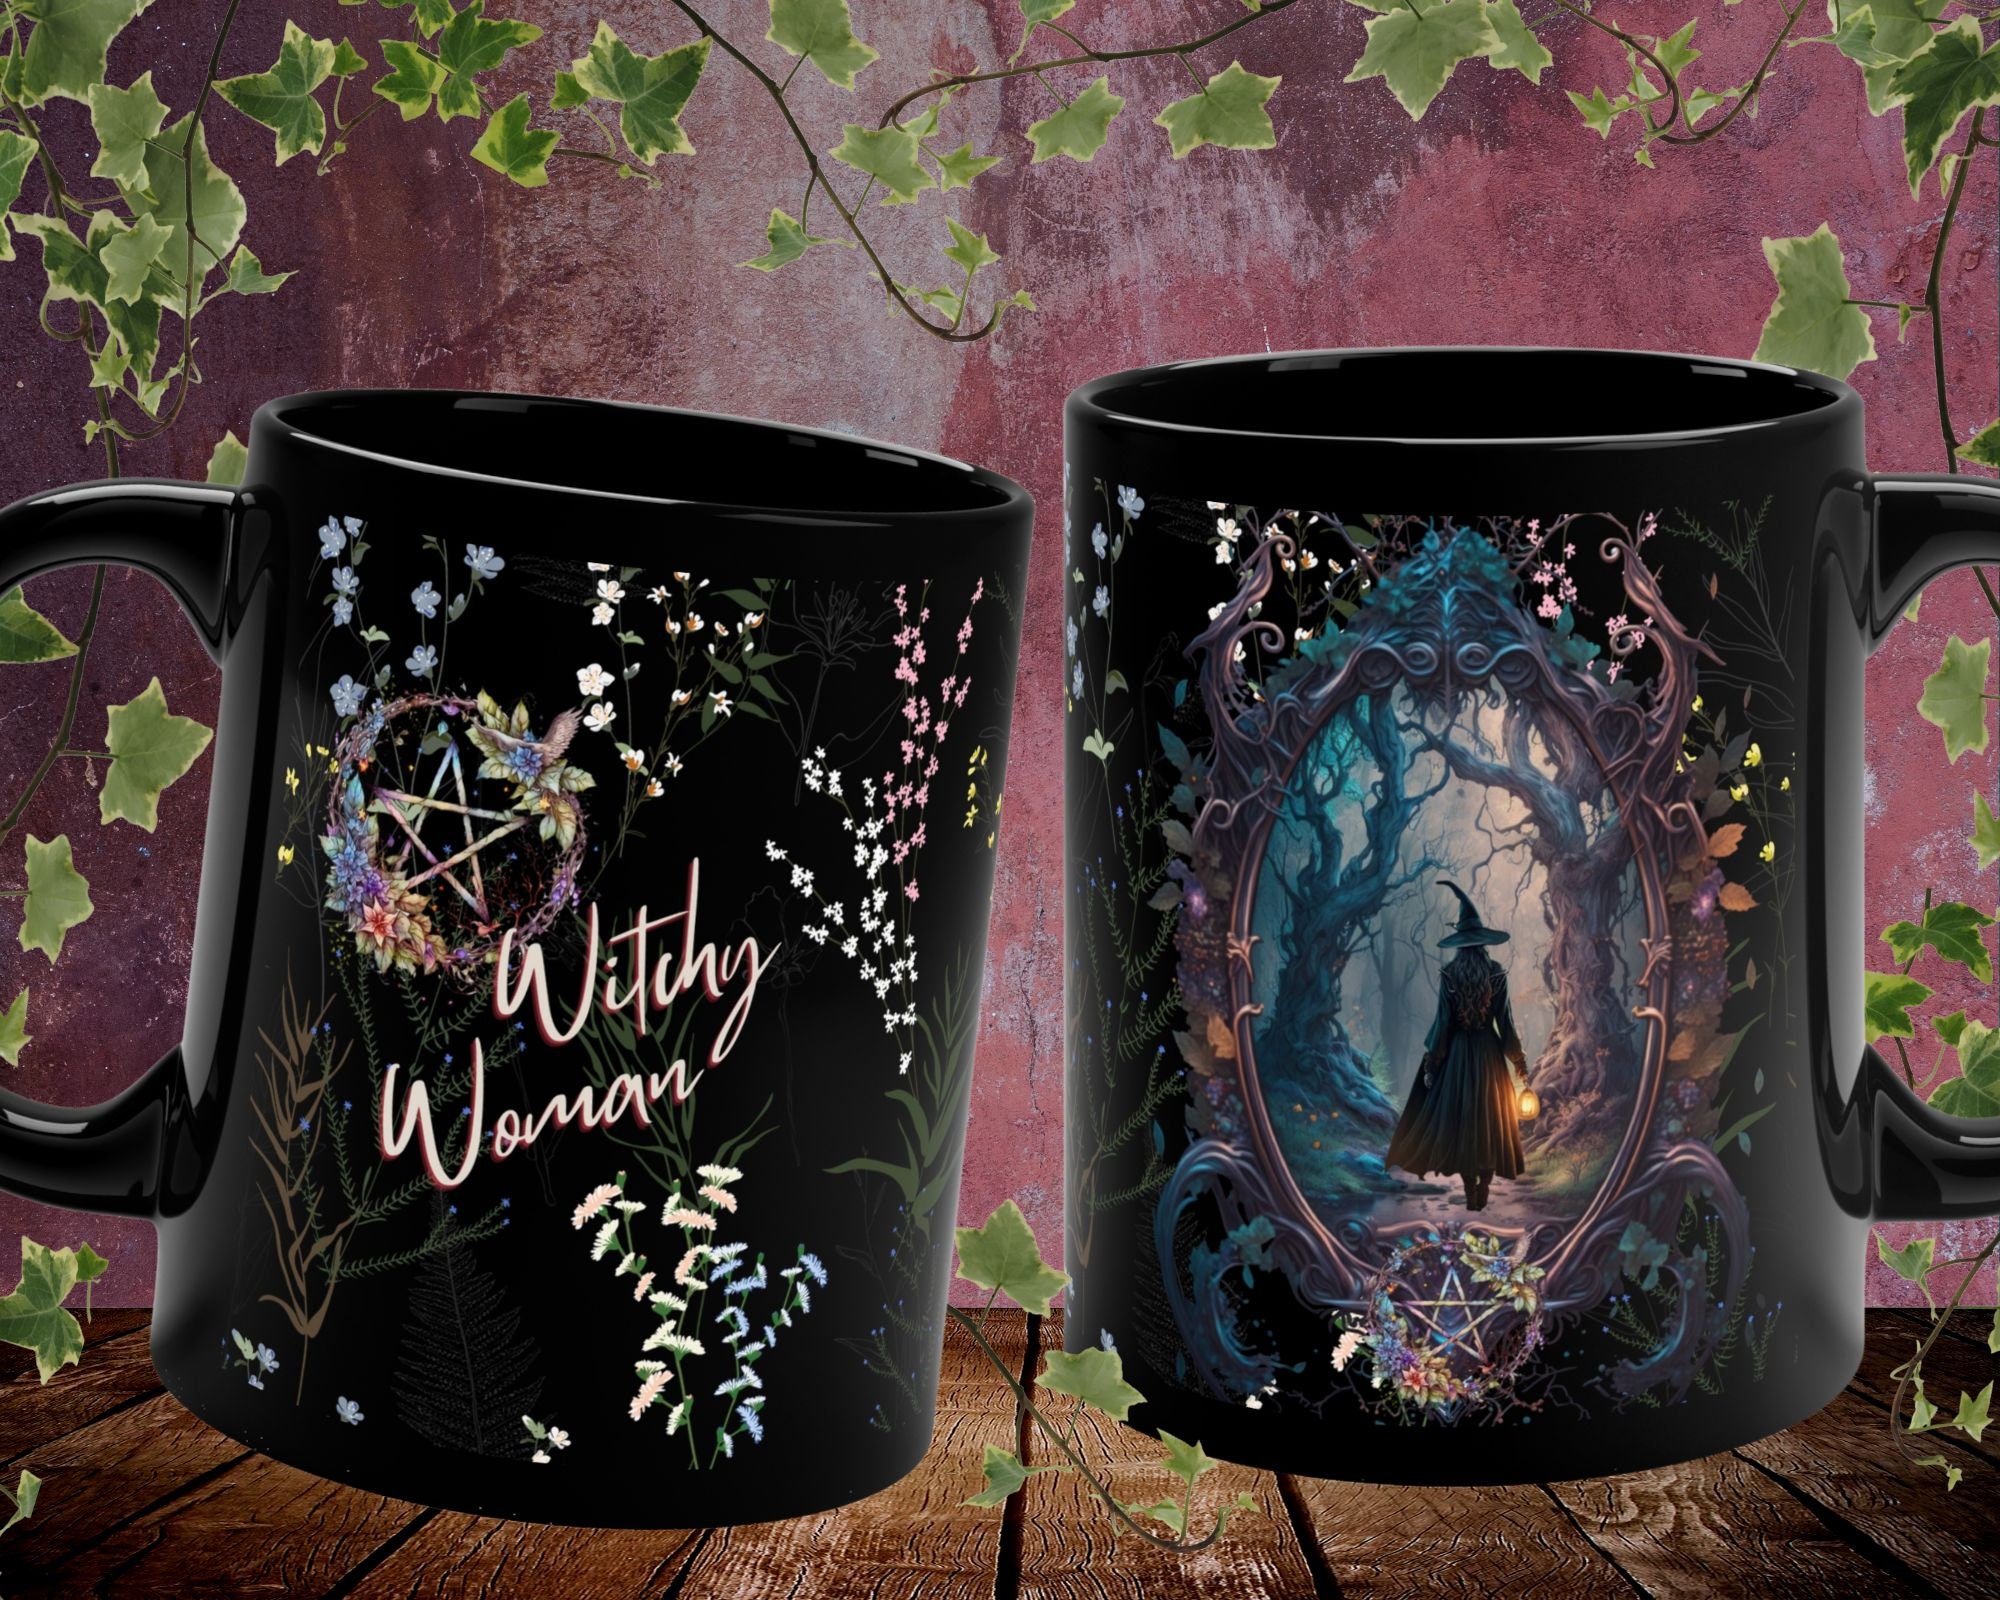 WITCH TUMBLER - Witches Tumbler with Lid - Classy Halloween Tumbler Cup -  Cute, Funny Witch Gifts for Friends - Durable, Vacuum Insulated Cup -  Stainless Steel Tumbler for Hot or Cold Drinks37065 37067